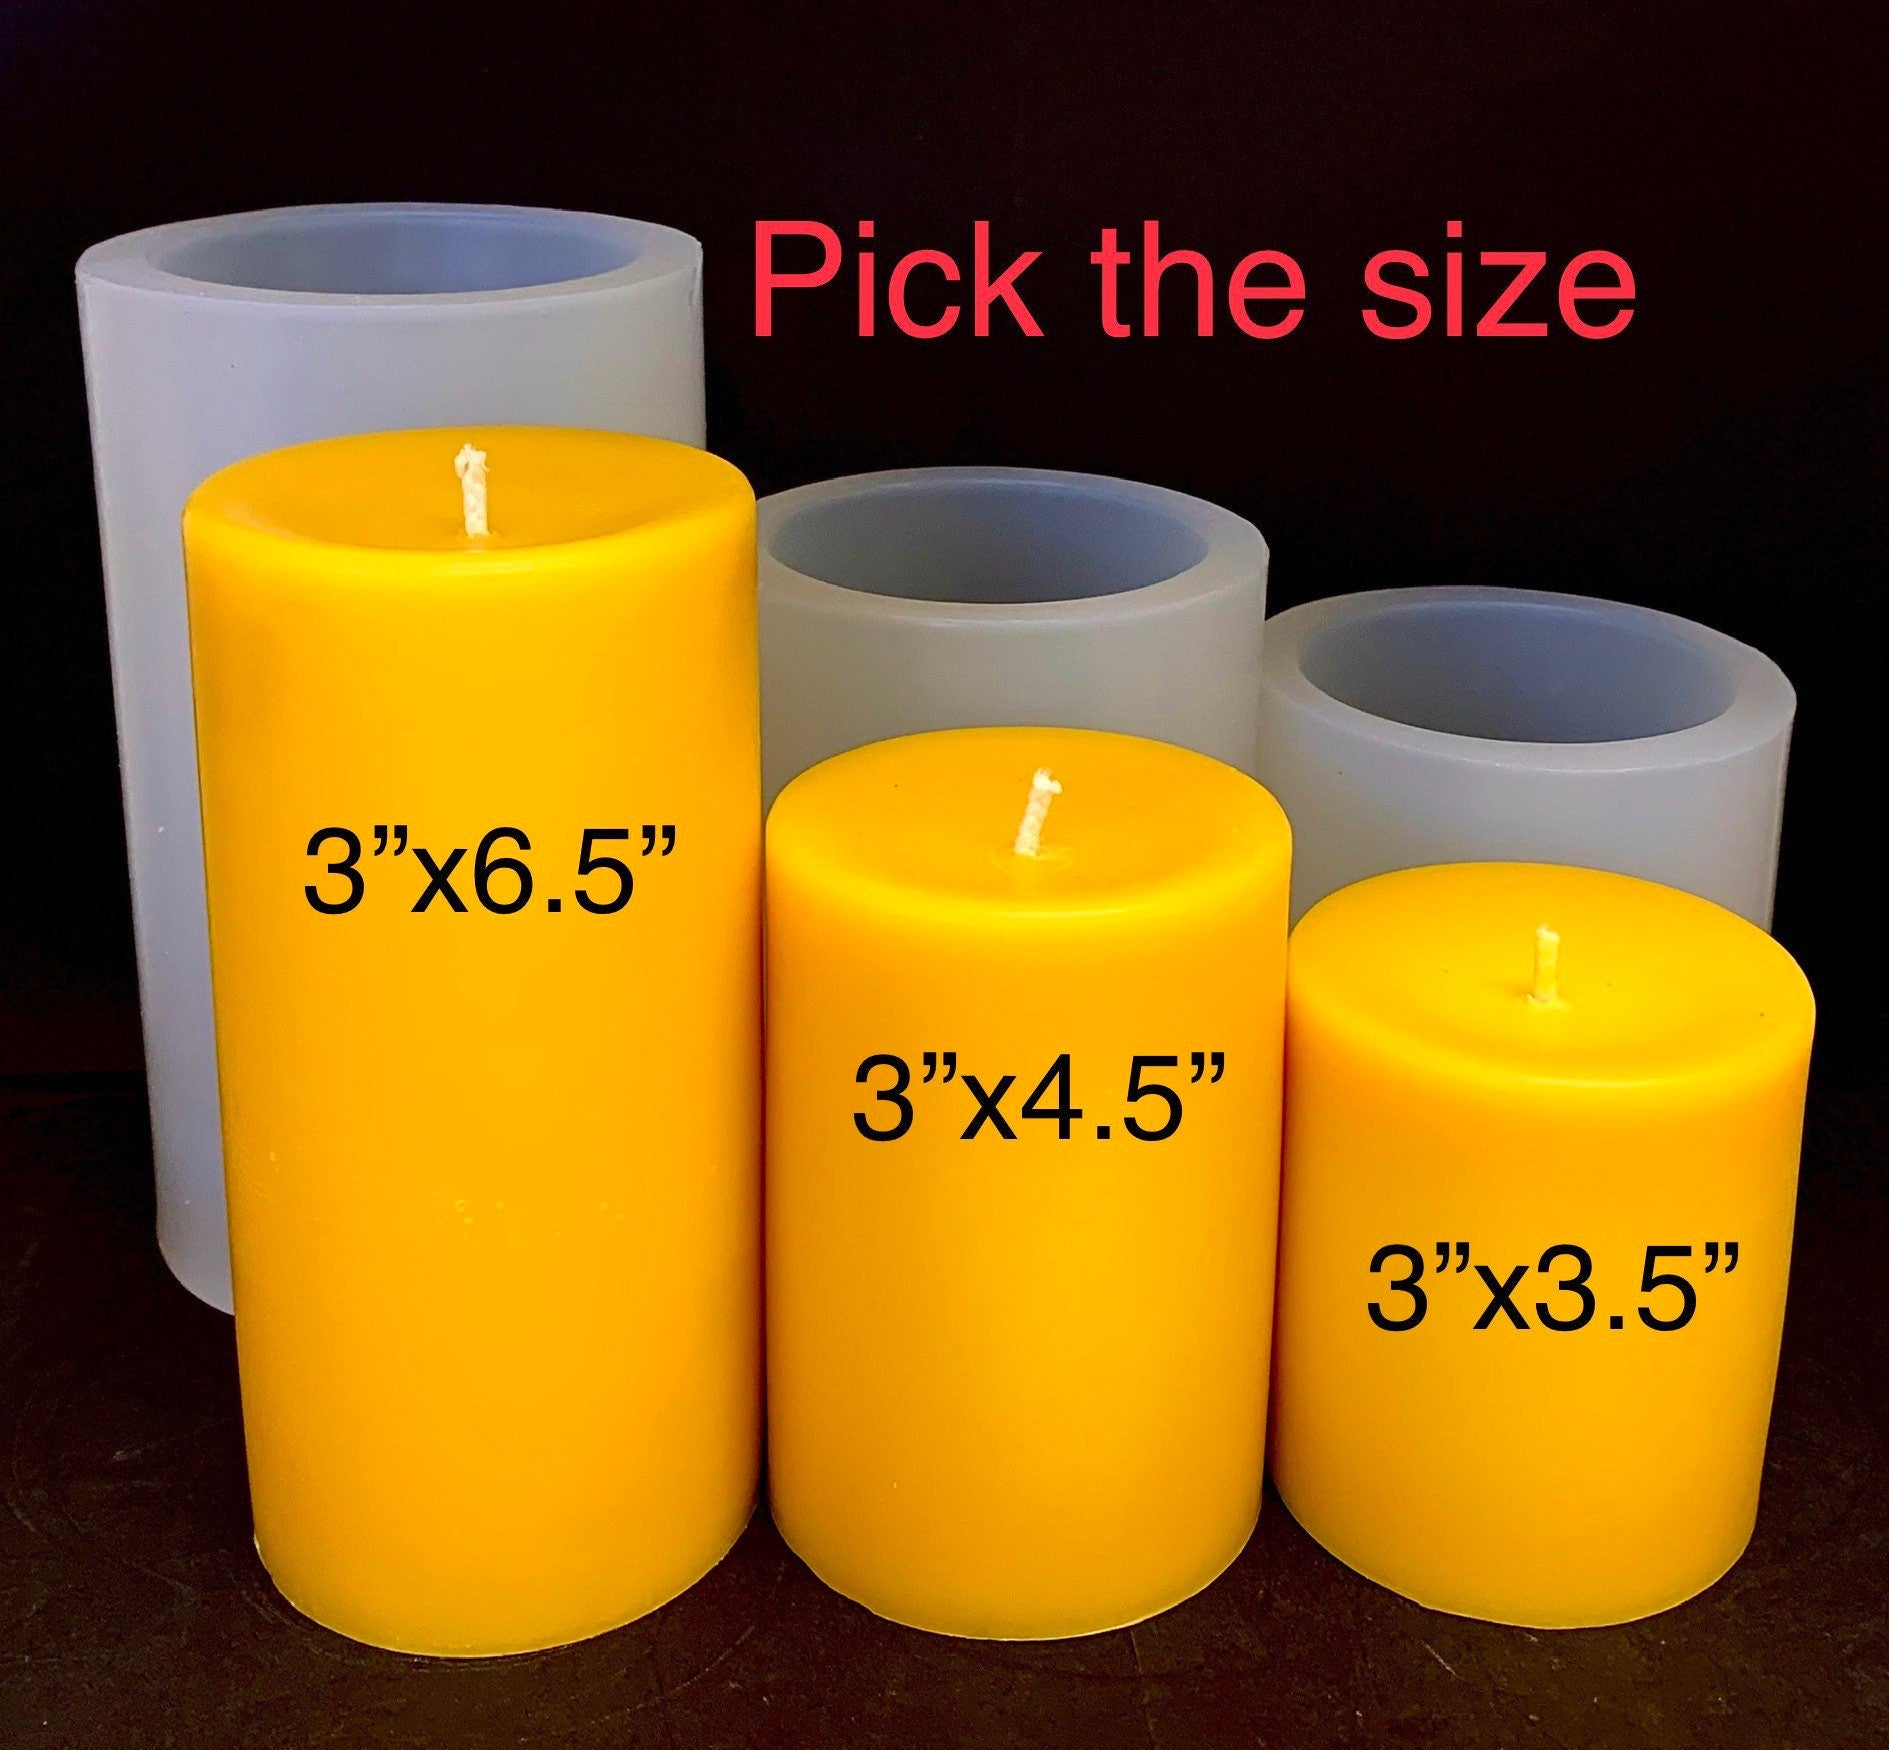 Silicone pillar candle Mold - soap resin mold - 3'' wide – The Handmade  Charm